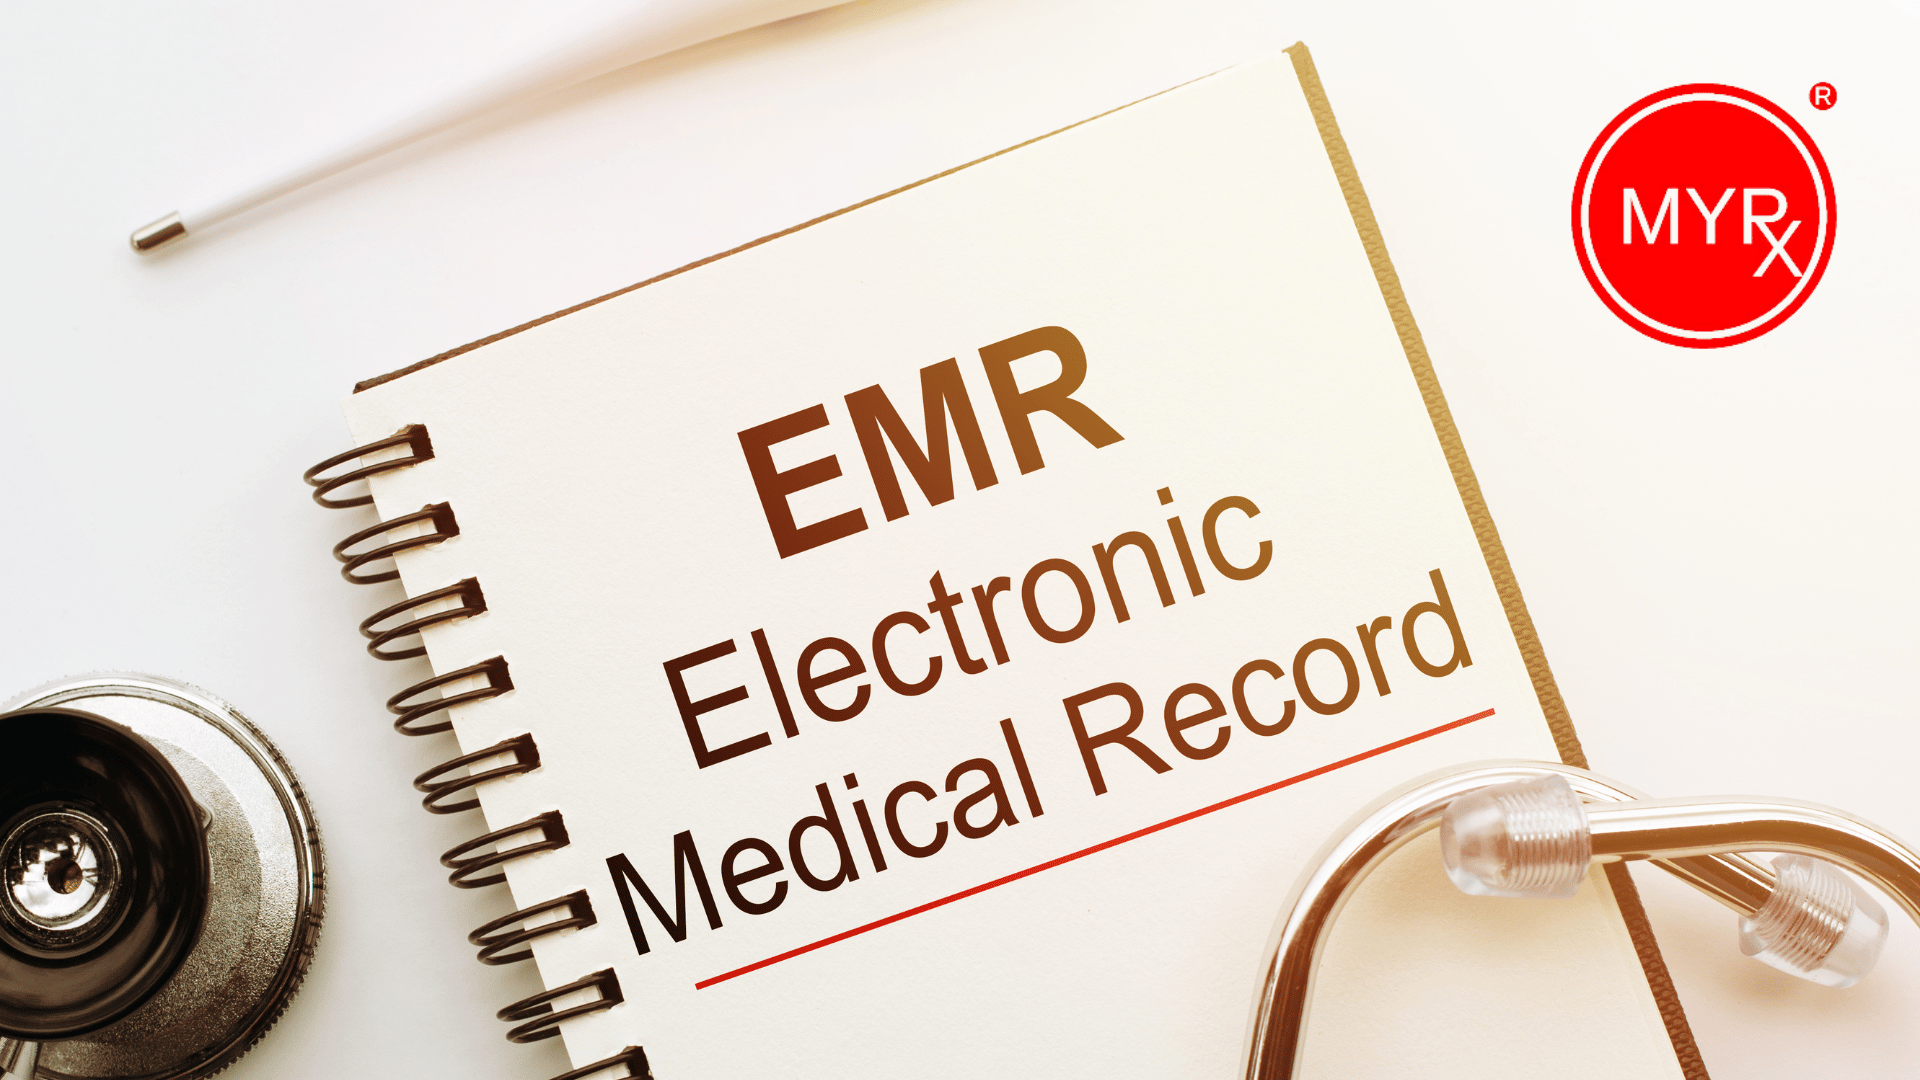 enhancing-patient-care-how-EMR-systems-revolutionize-medical-record-keeping-for-physicians